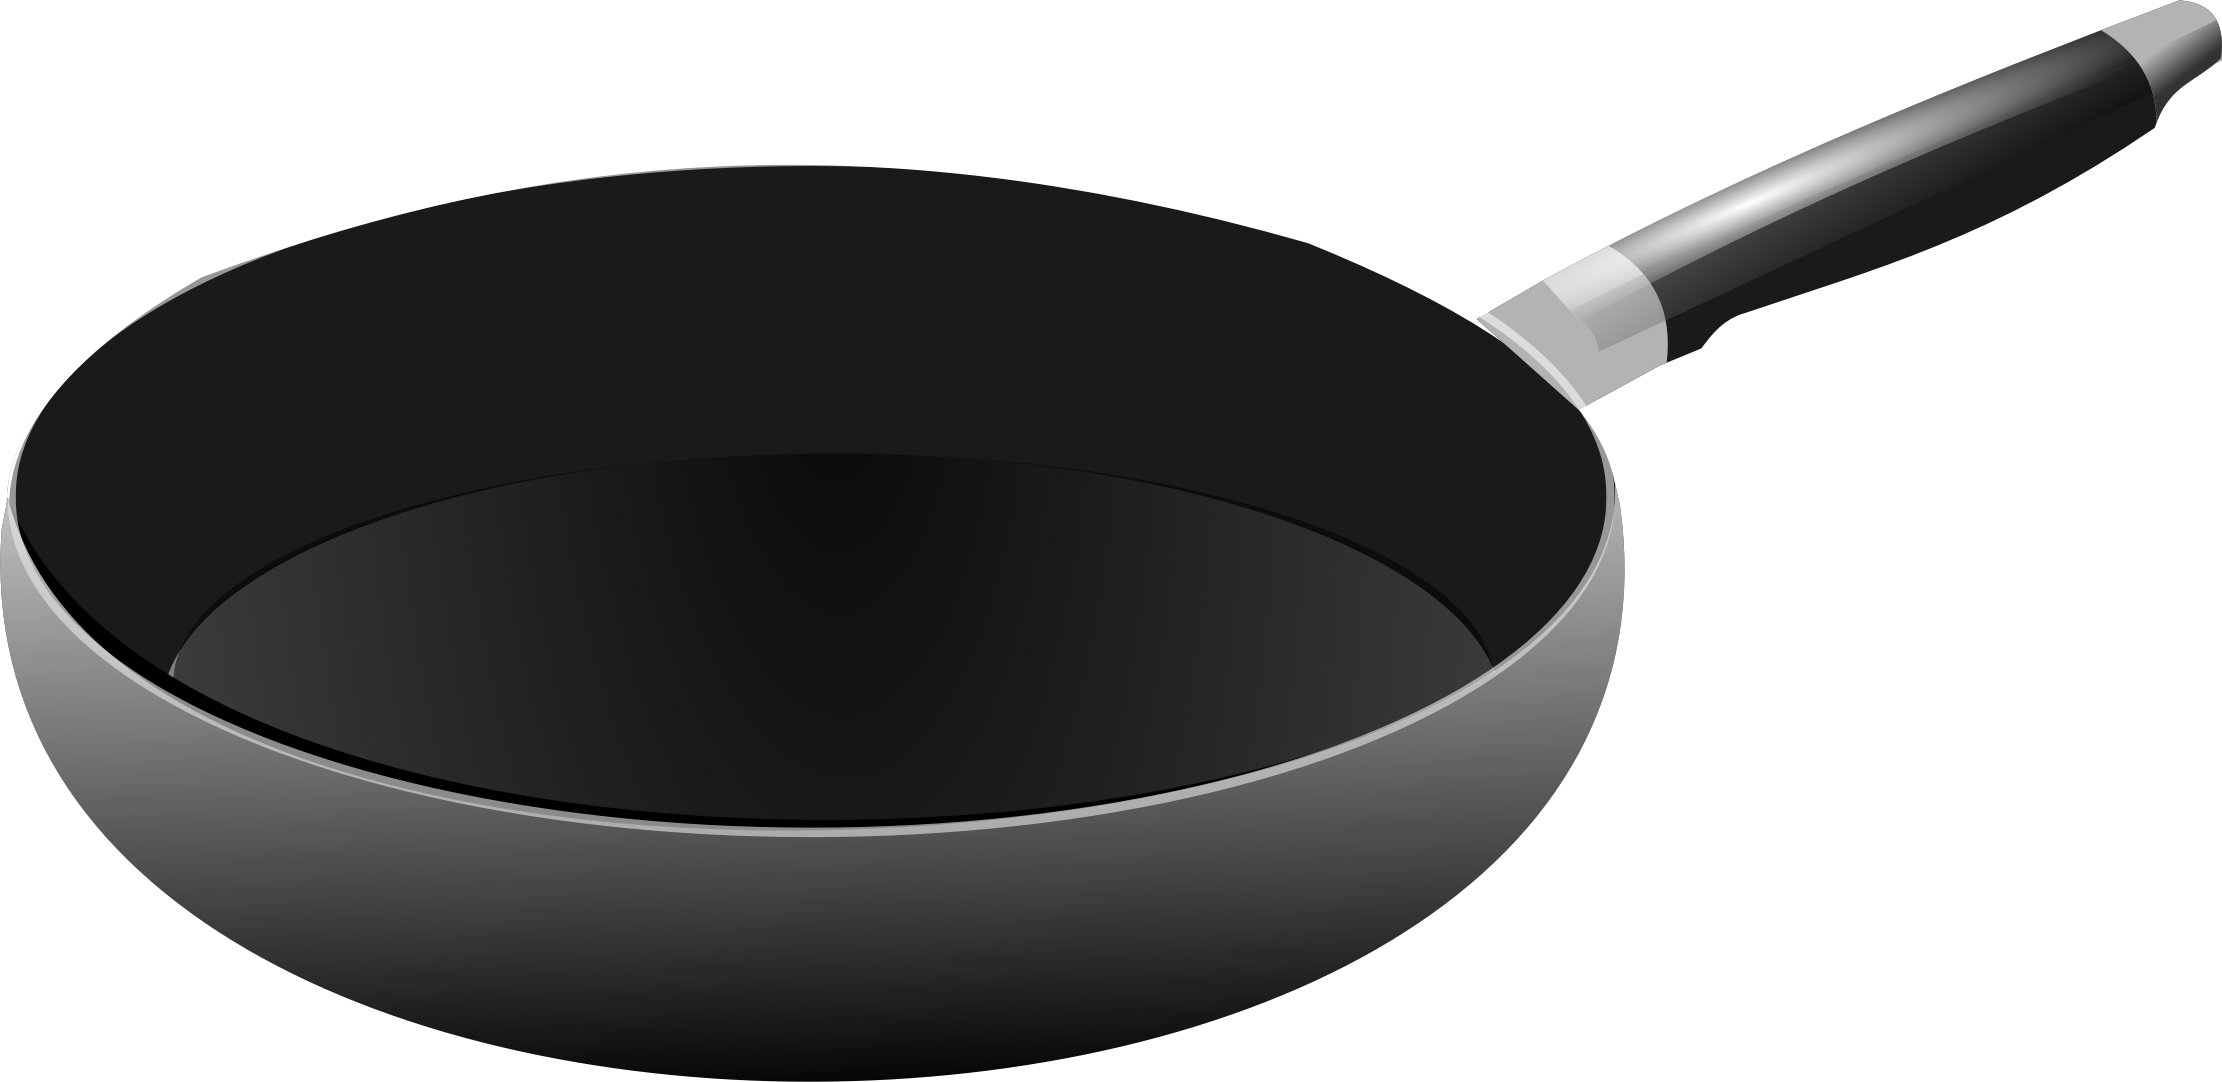 cooking pan clipart - photo #20